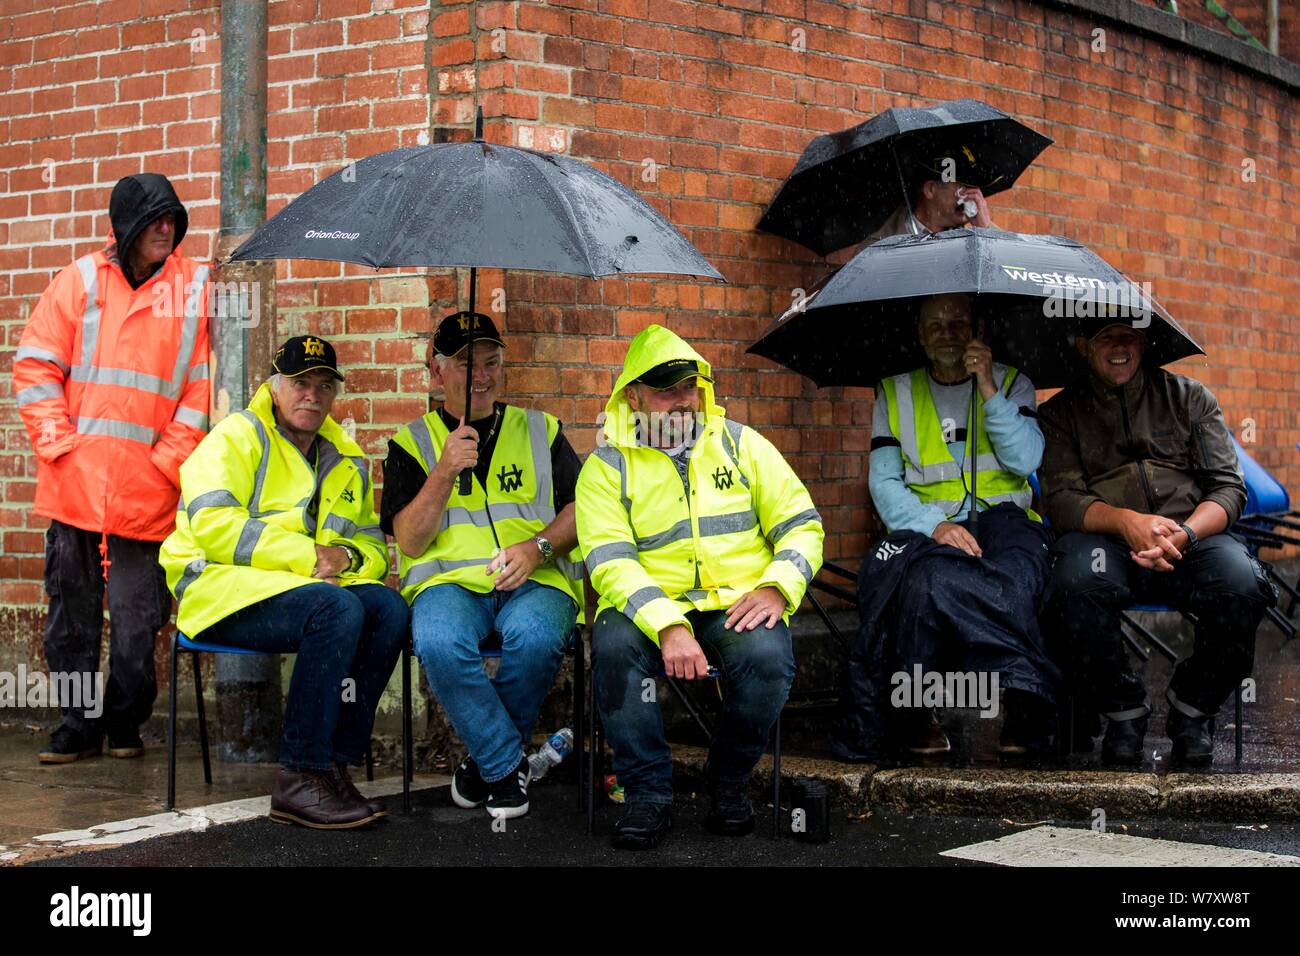 Harland and Wolff workers listen to Irish singer songwriter Tommy Sands performing at the gates of Harland and Wolff shipyard, Belfast, in support of the workers who are calling for the shipyard to be renationalised, as there has been deluge of support from donations of suncream and food to performances by local celebrities. Stock Photo